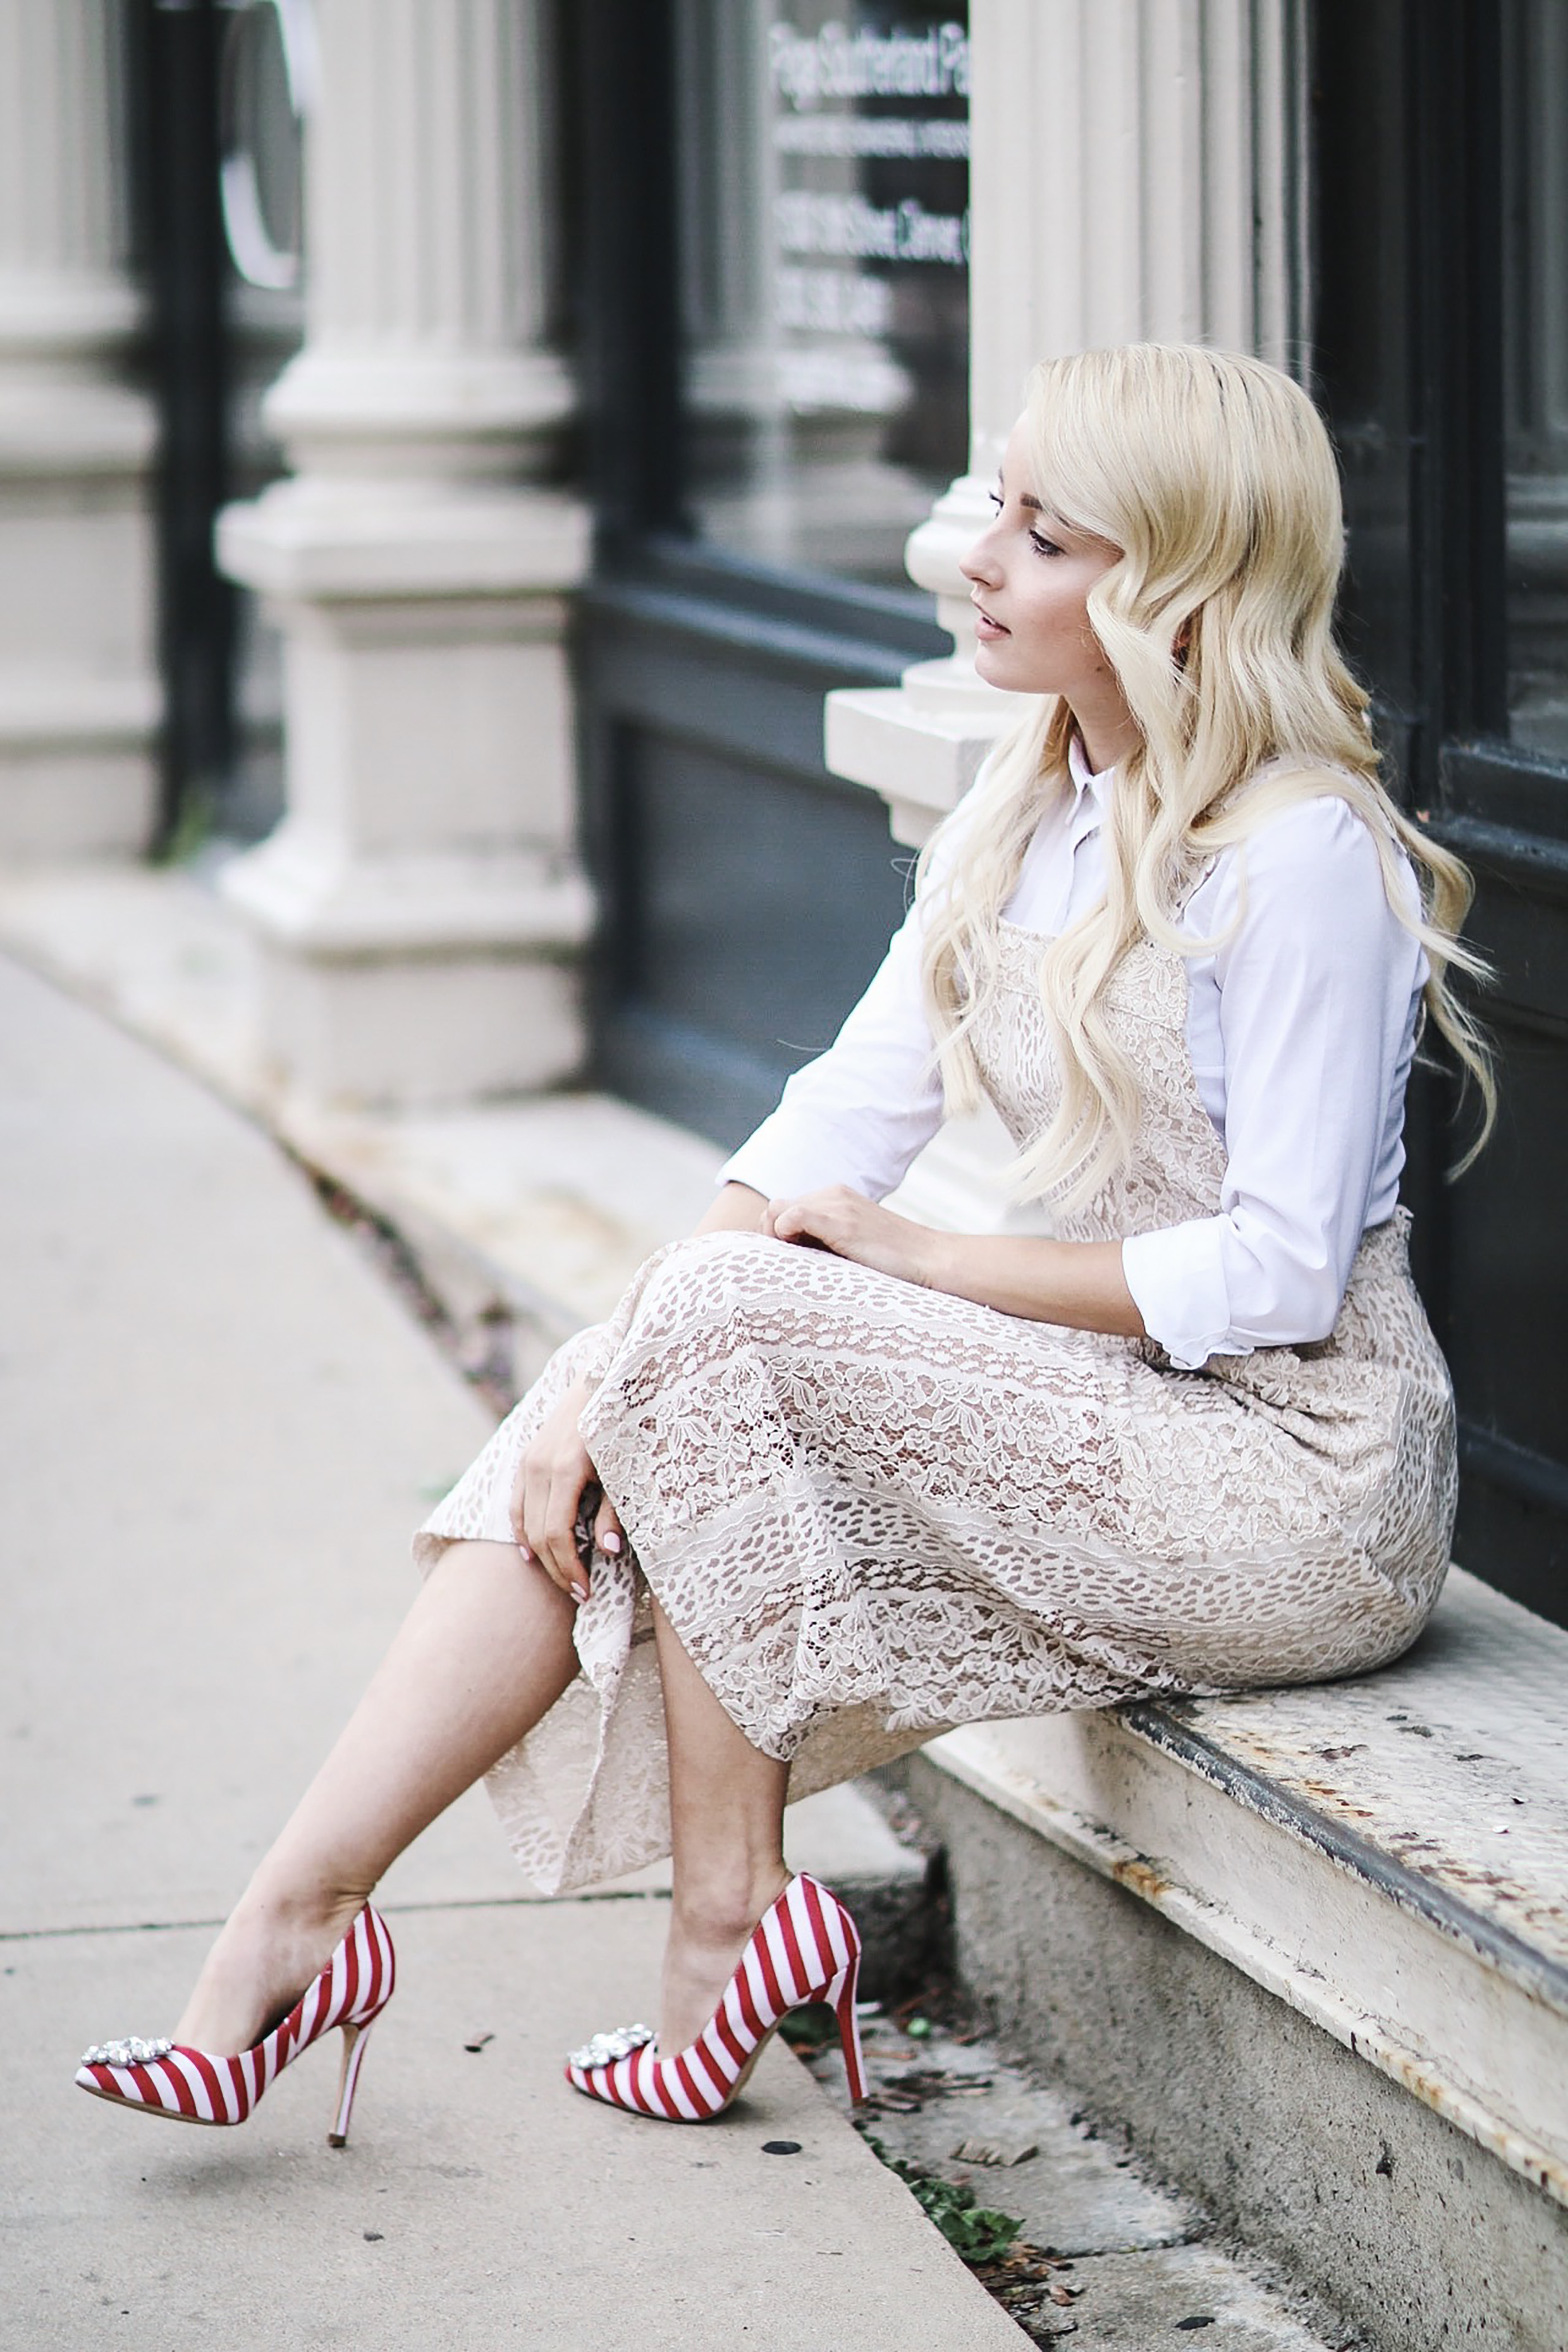 Alena Gidenko of modaprints.com styles a lace cream romper with a white button up and spices up the look with fun striped red heels